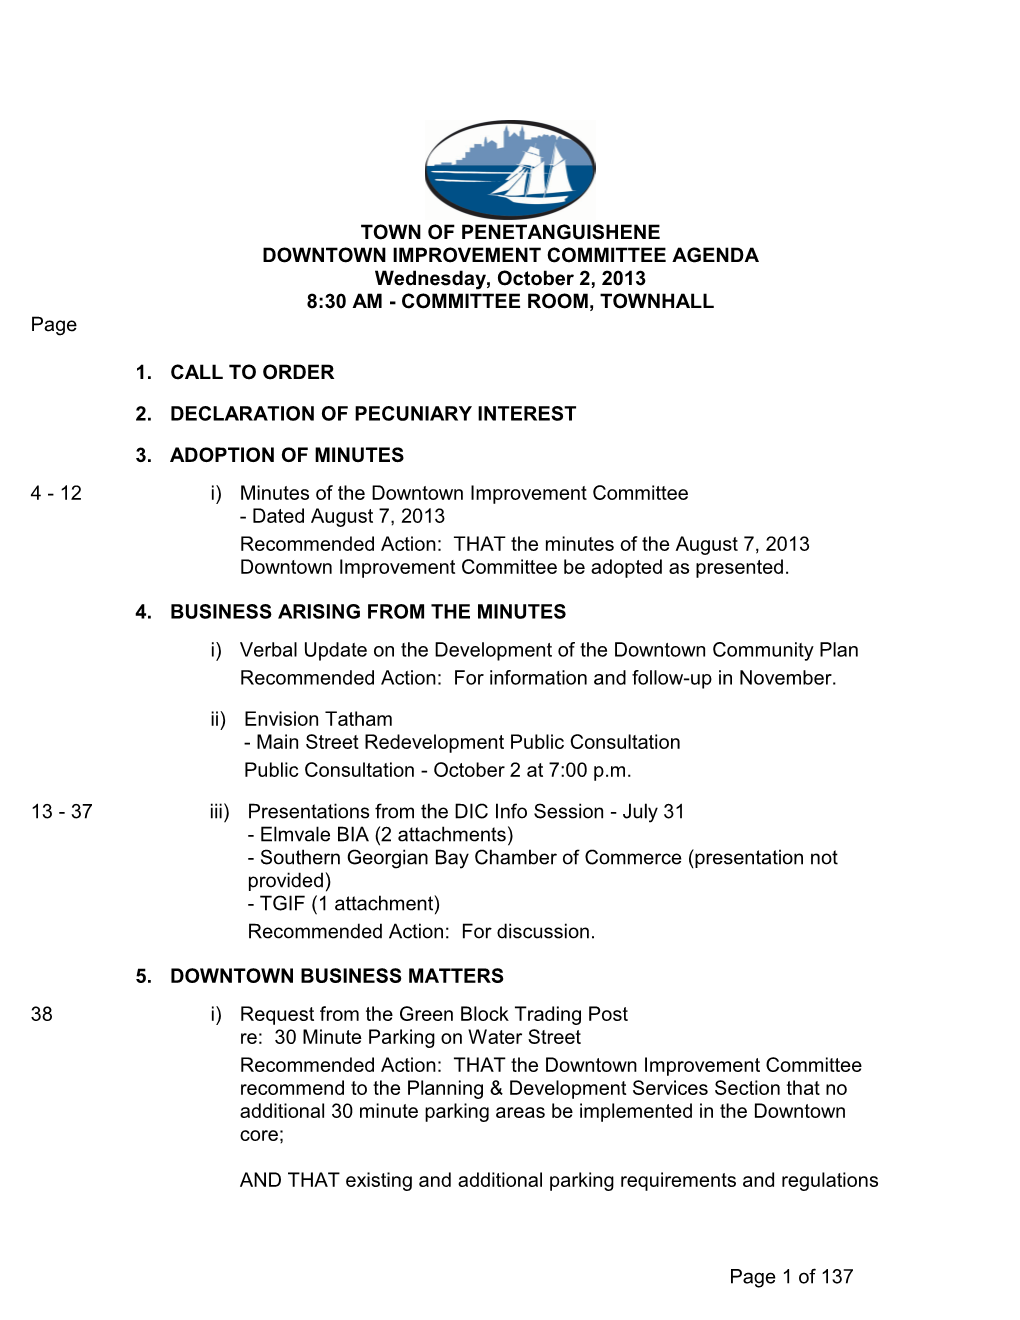 TOWN of PENETANGUISHENE DOWNTOWN IMPROVEMENT COMMITTEE AGENDA Wednesday, October 2, 2013 8:30 AM - COMMITTEE ROOM, TOWNHALL Page